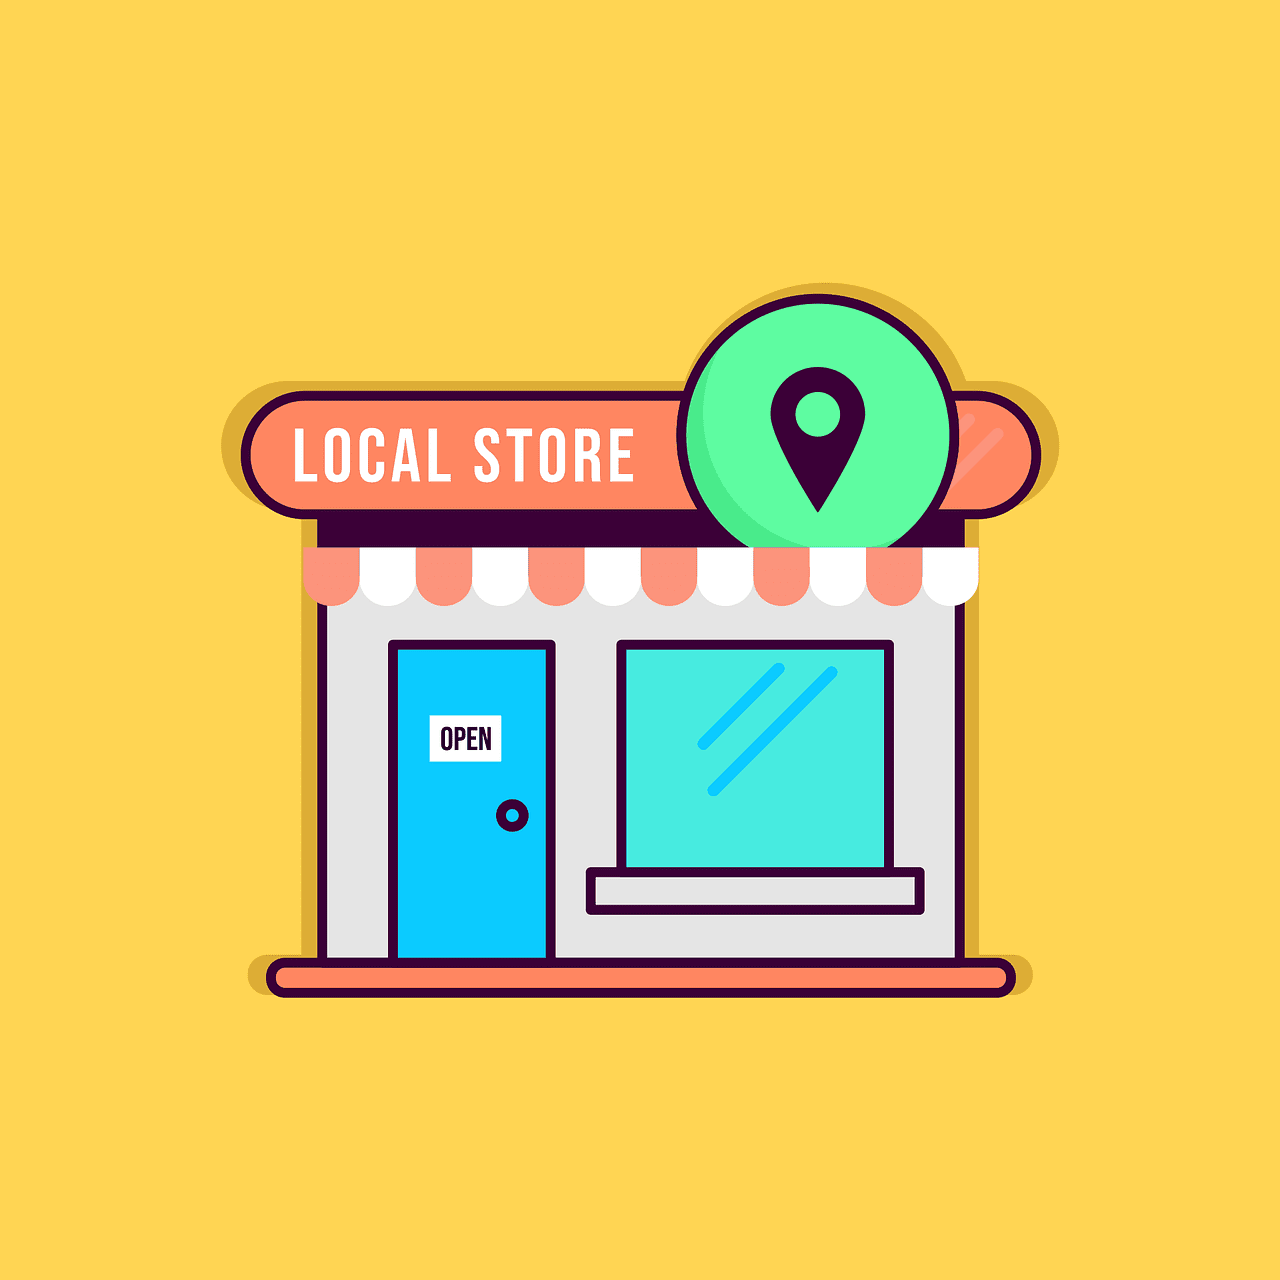 3 ways to engage your local audience and grow your business